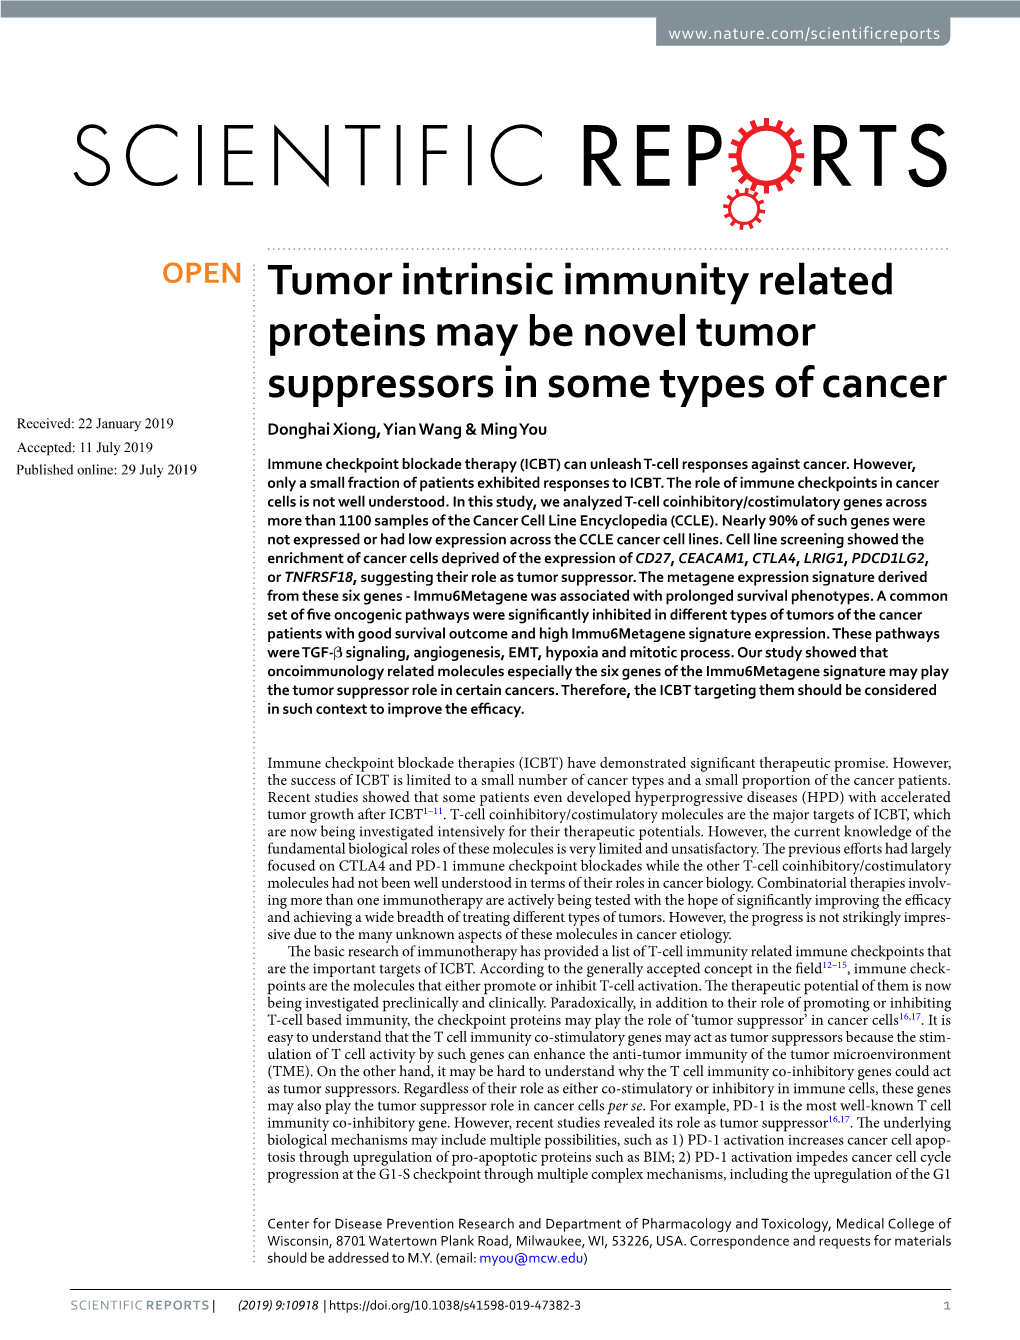 Tumor Intrinsic Immunity Related Proteins May Be Novel